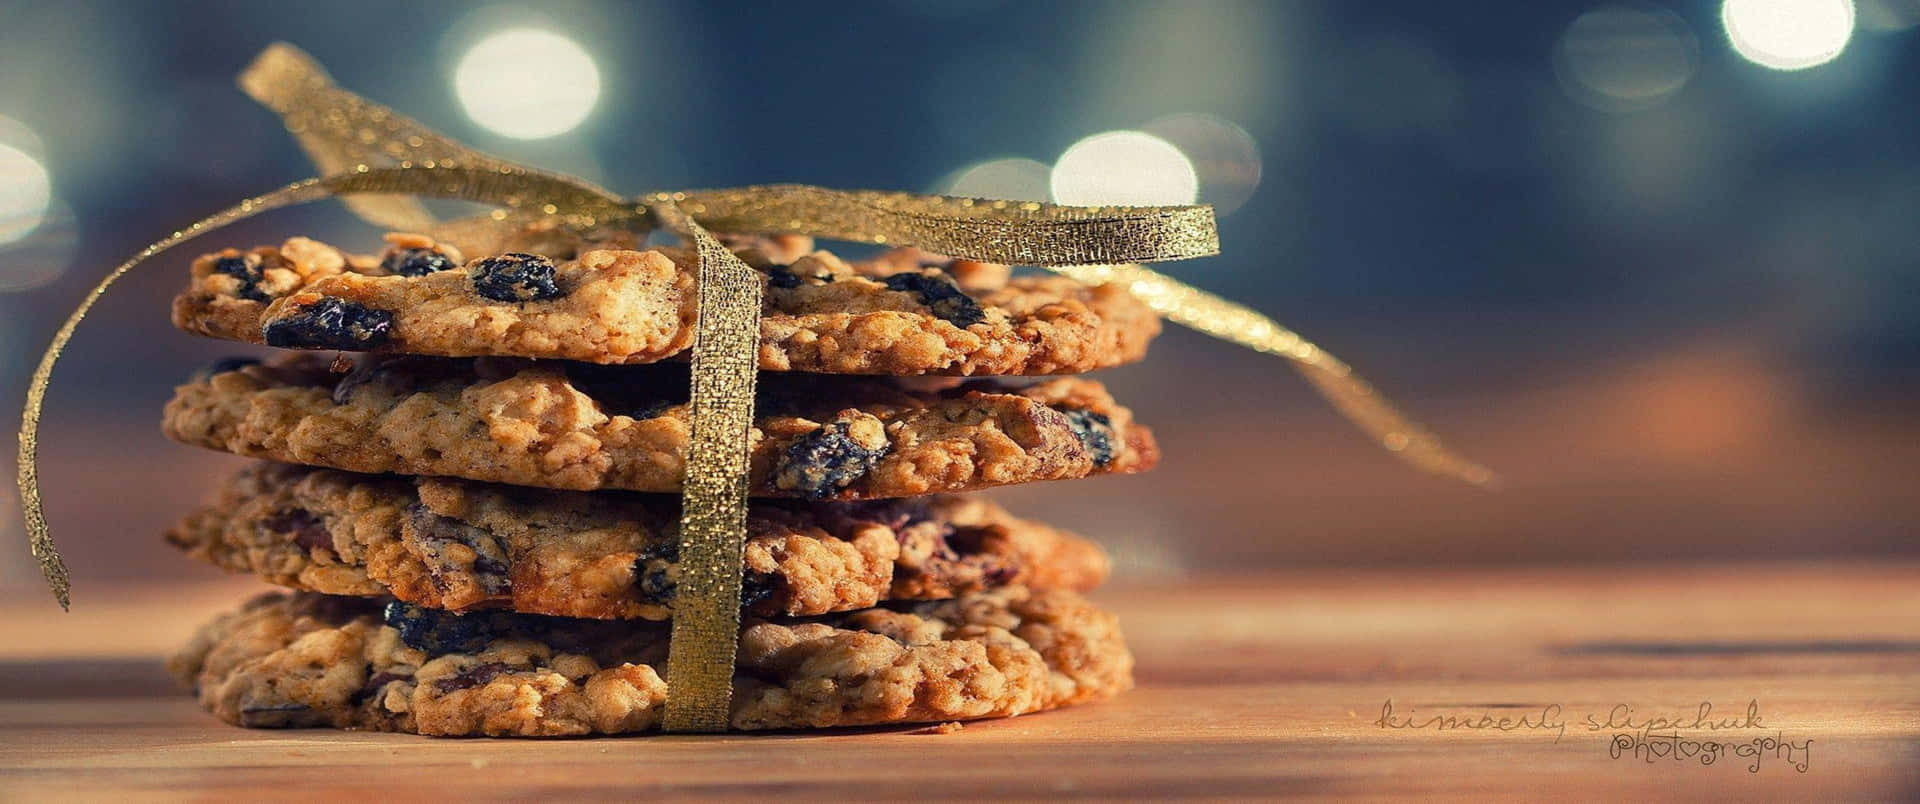 Stacked Up Chocolate Chips 3440x1440p Cookies Background